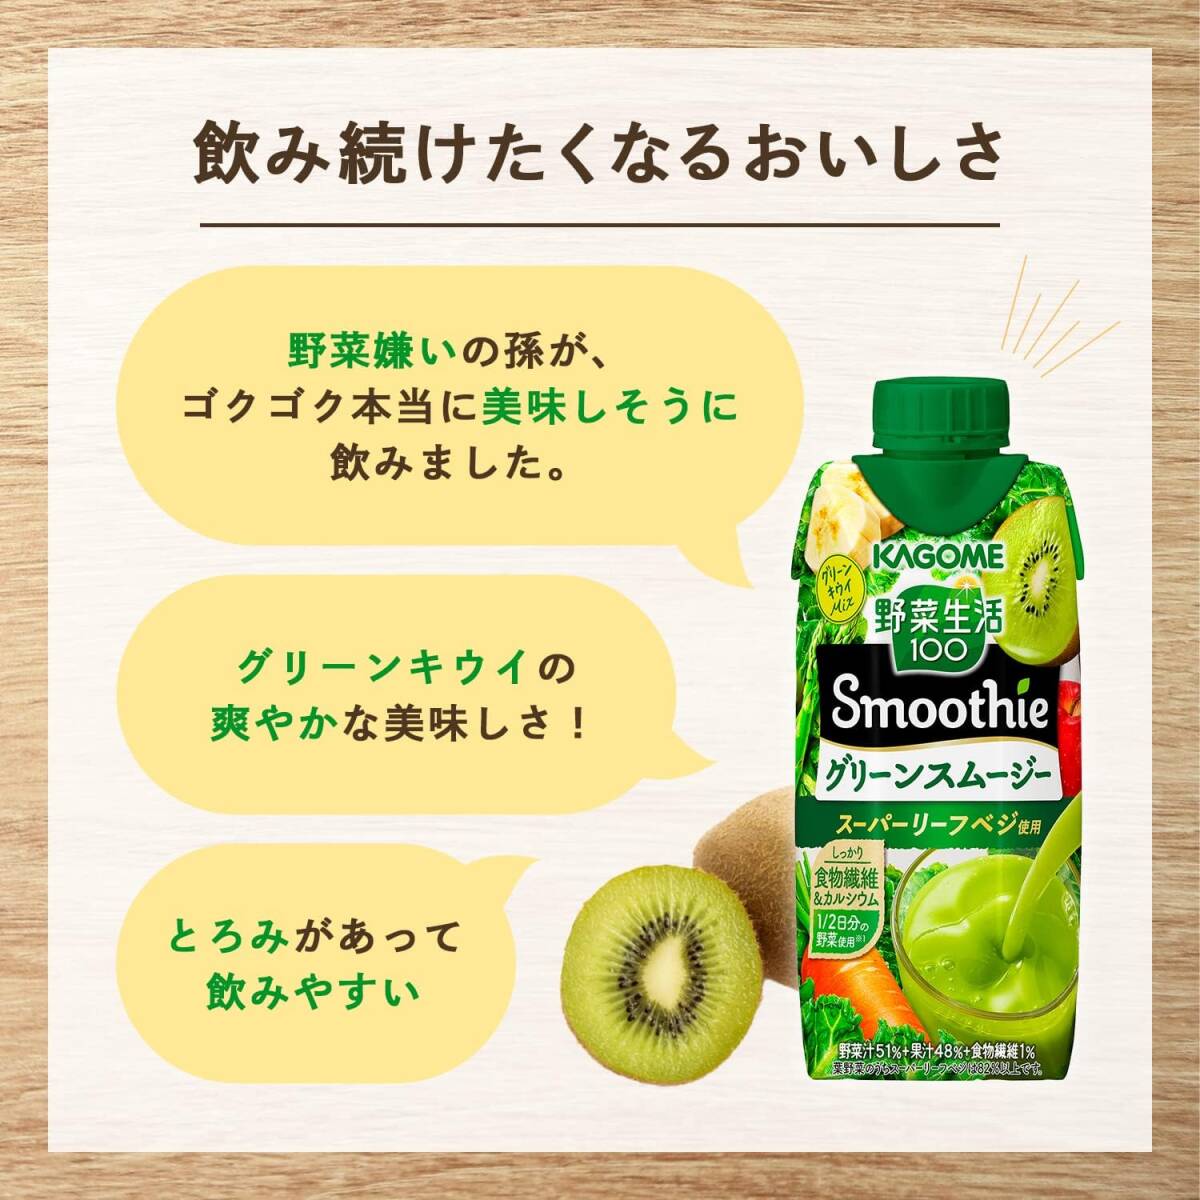  basket me vegetable life 100 Smoothie ( smoothie ) green smoothie Mix 330ml×1 2 ps cellulose 